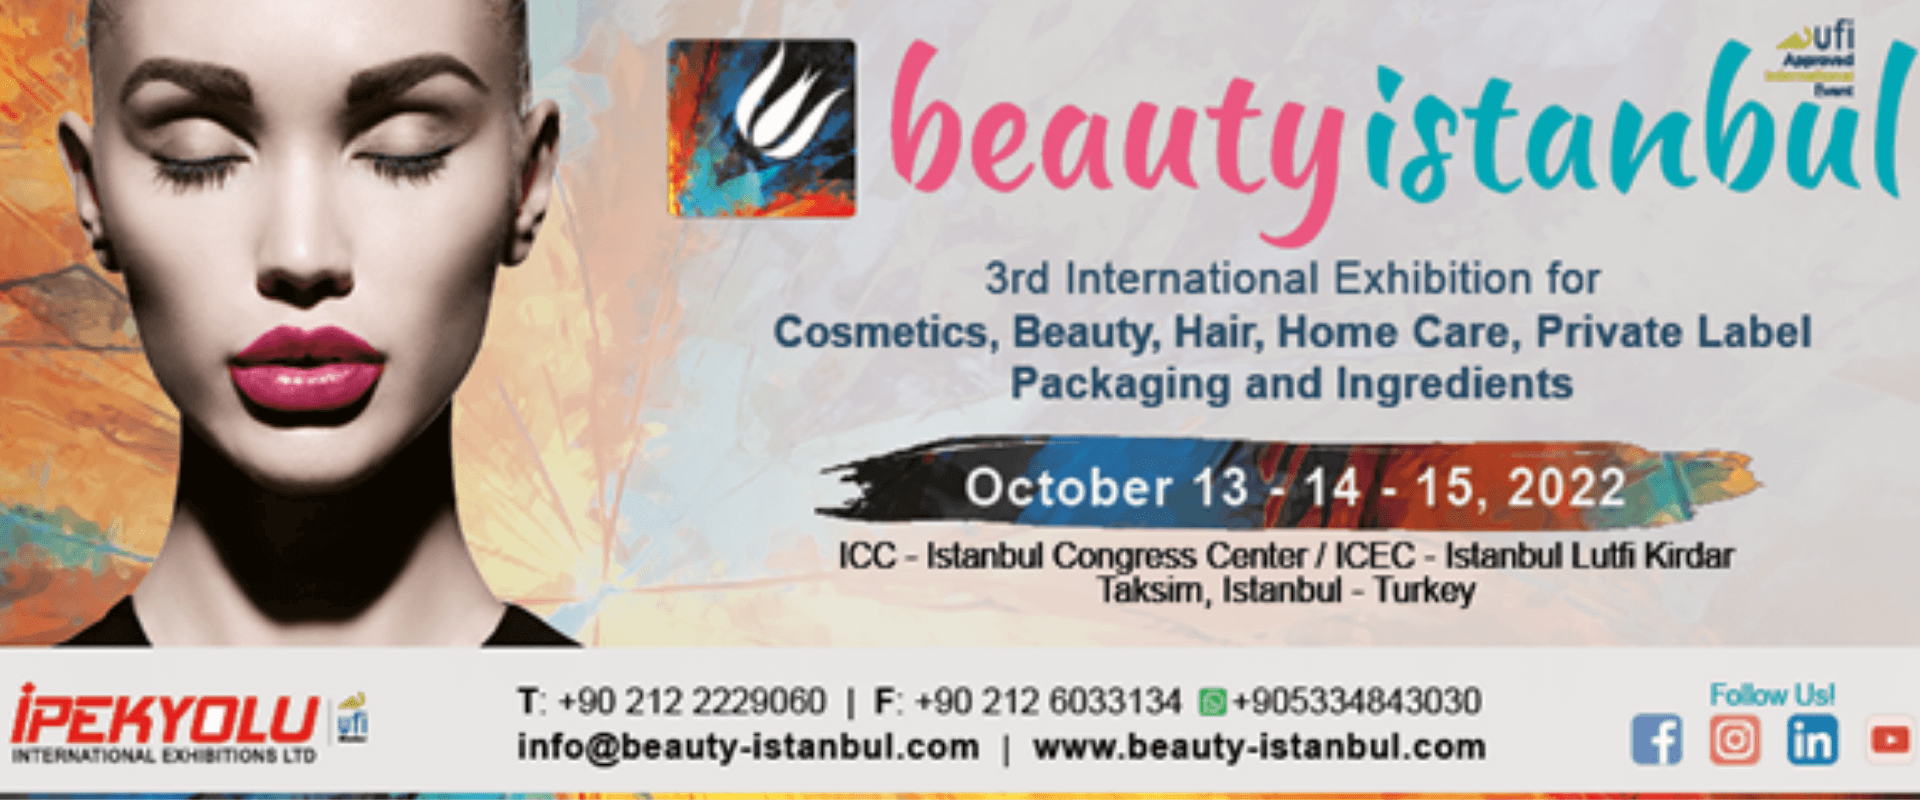 We will be Beautyistanbul Exhibition